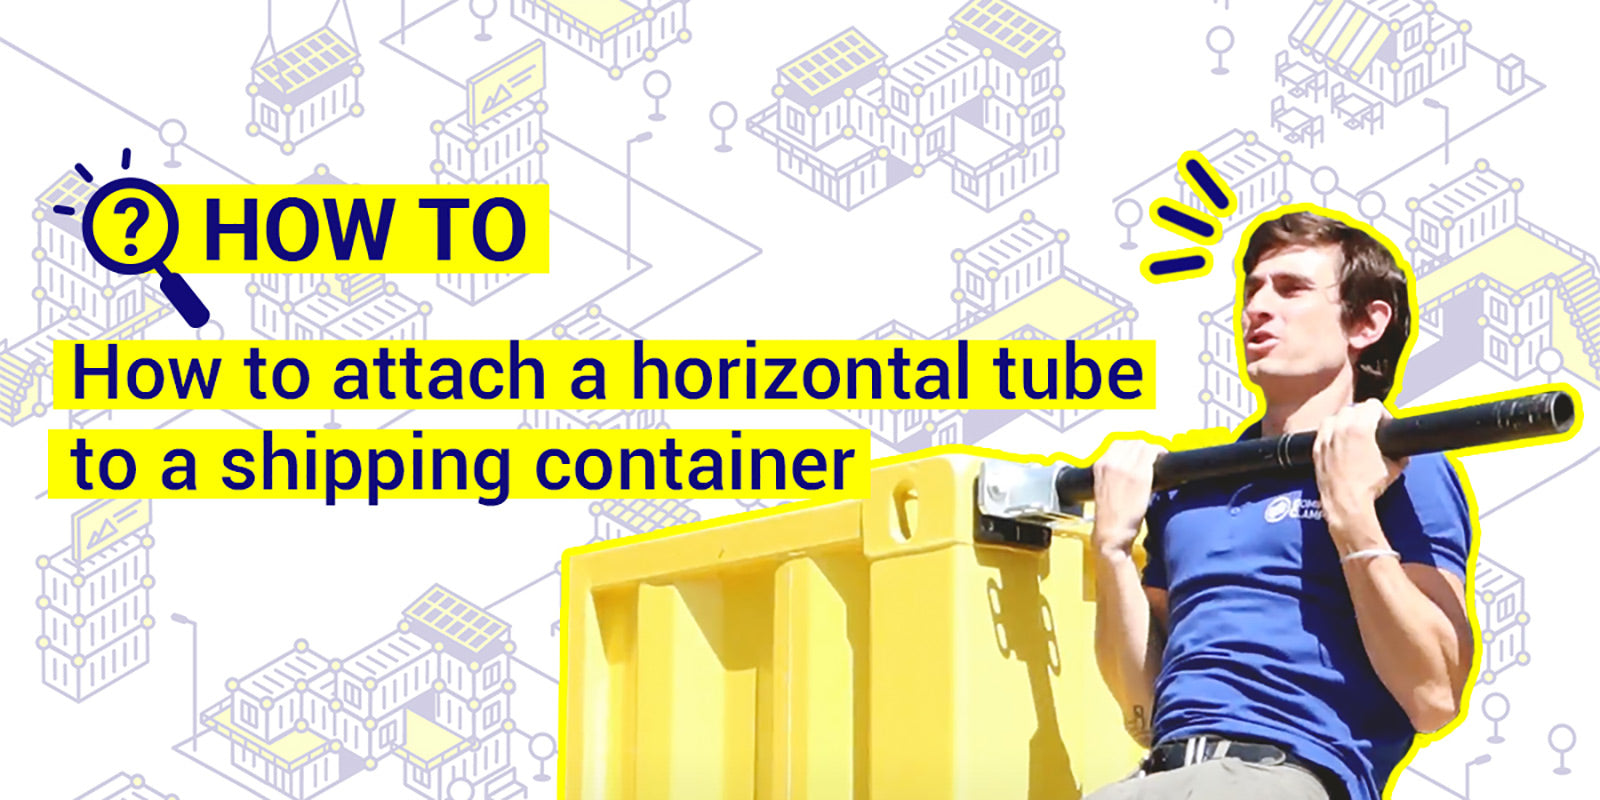 How to attach a horizontal tube to a shipping container.